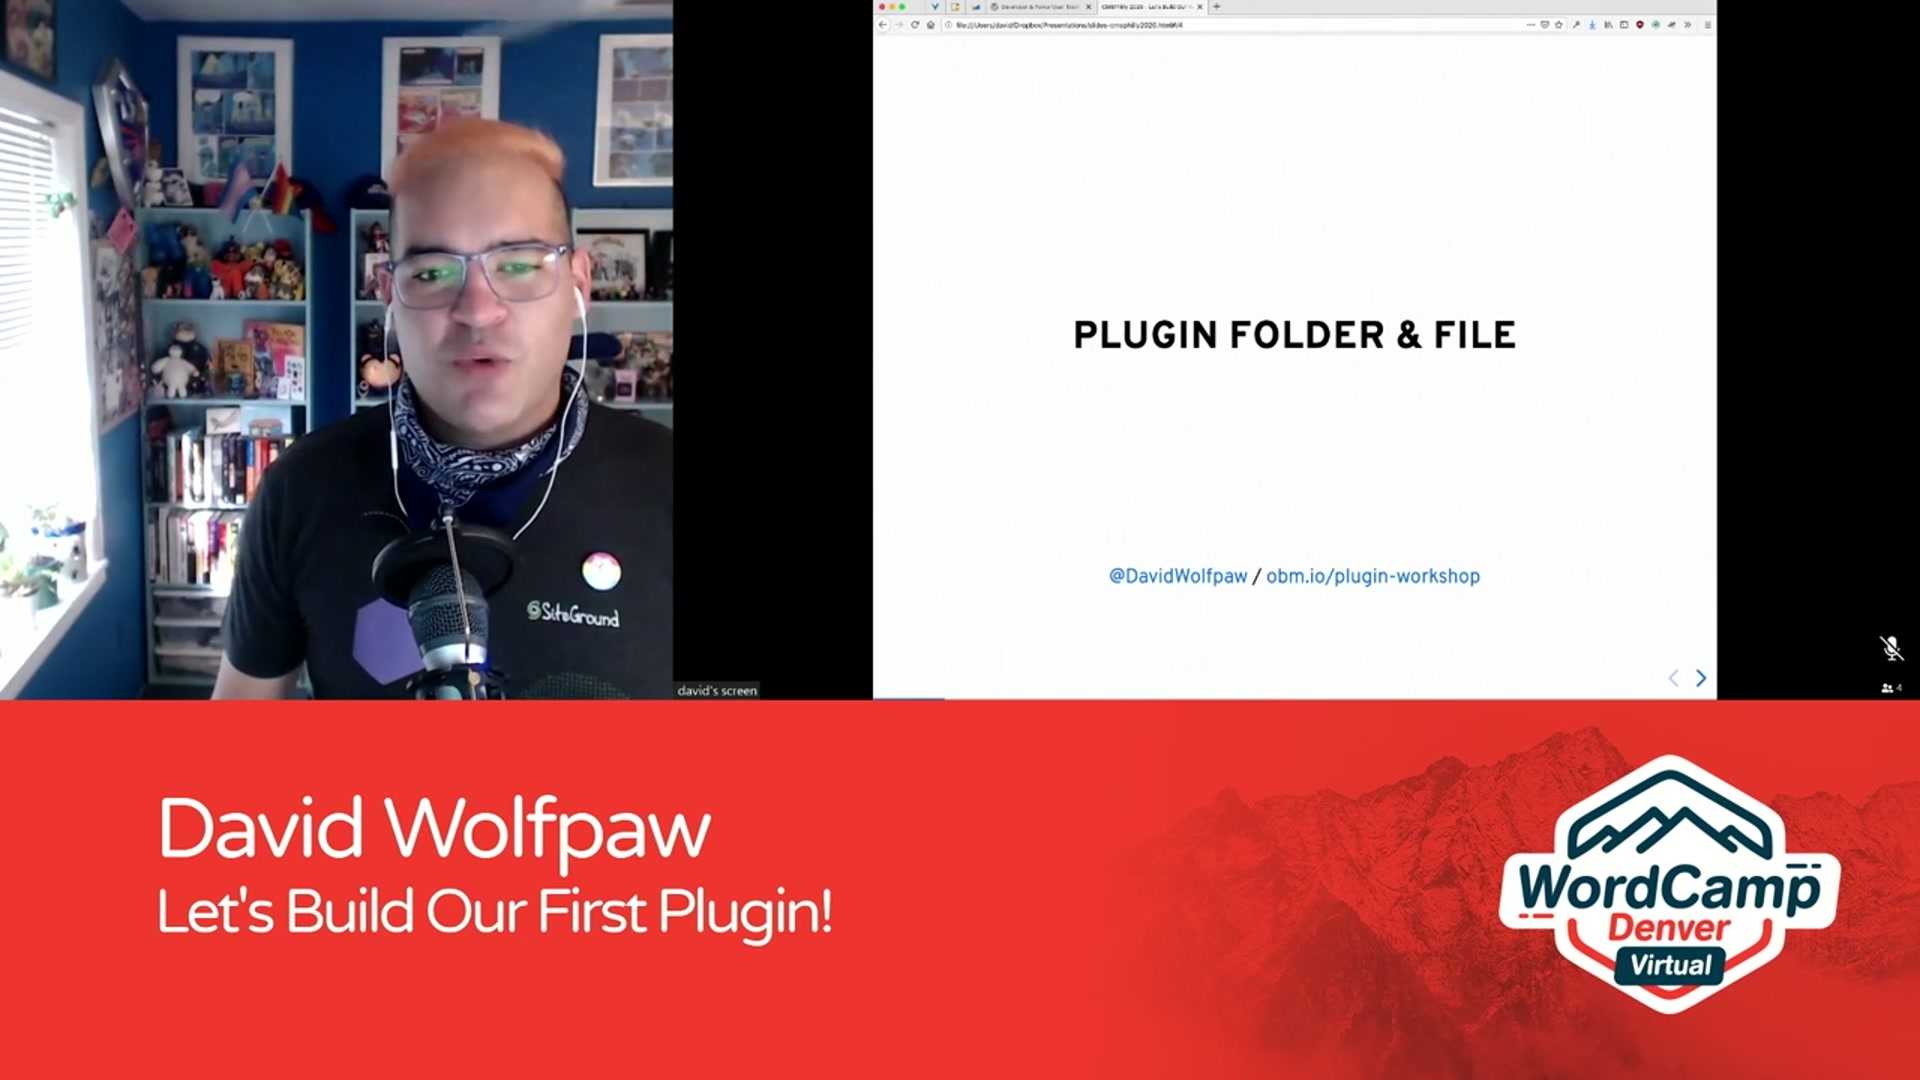 David Wolfpaw: Let’s Build Our First Plugin!